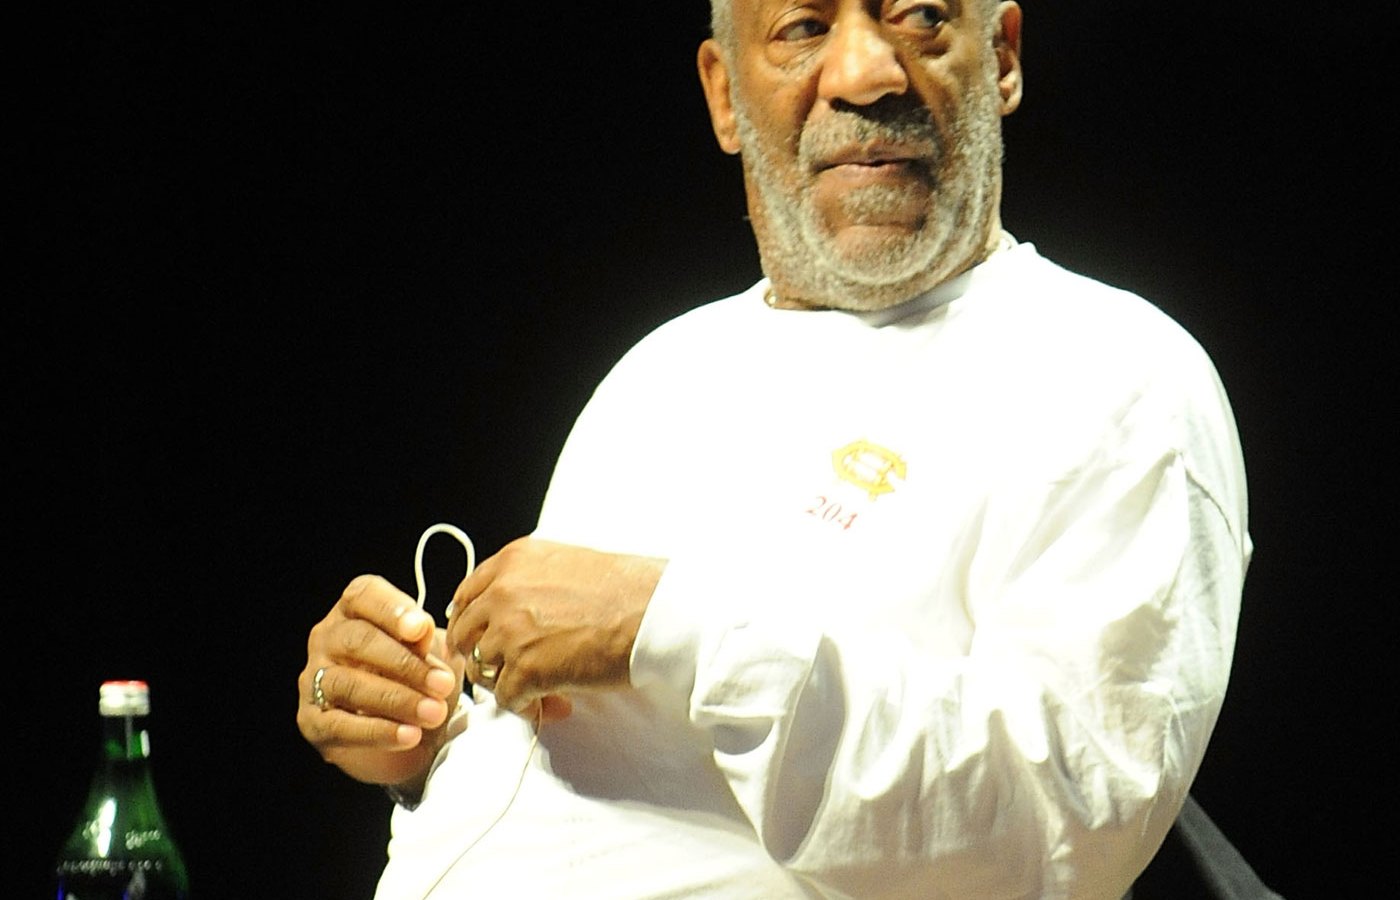 Bill Cosby was back on stage last night amid continued sexual abuse al